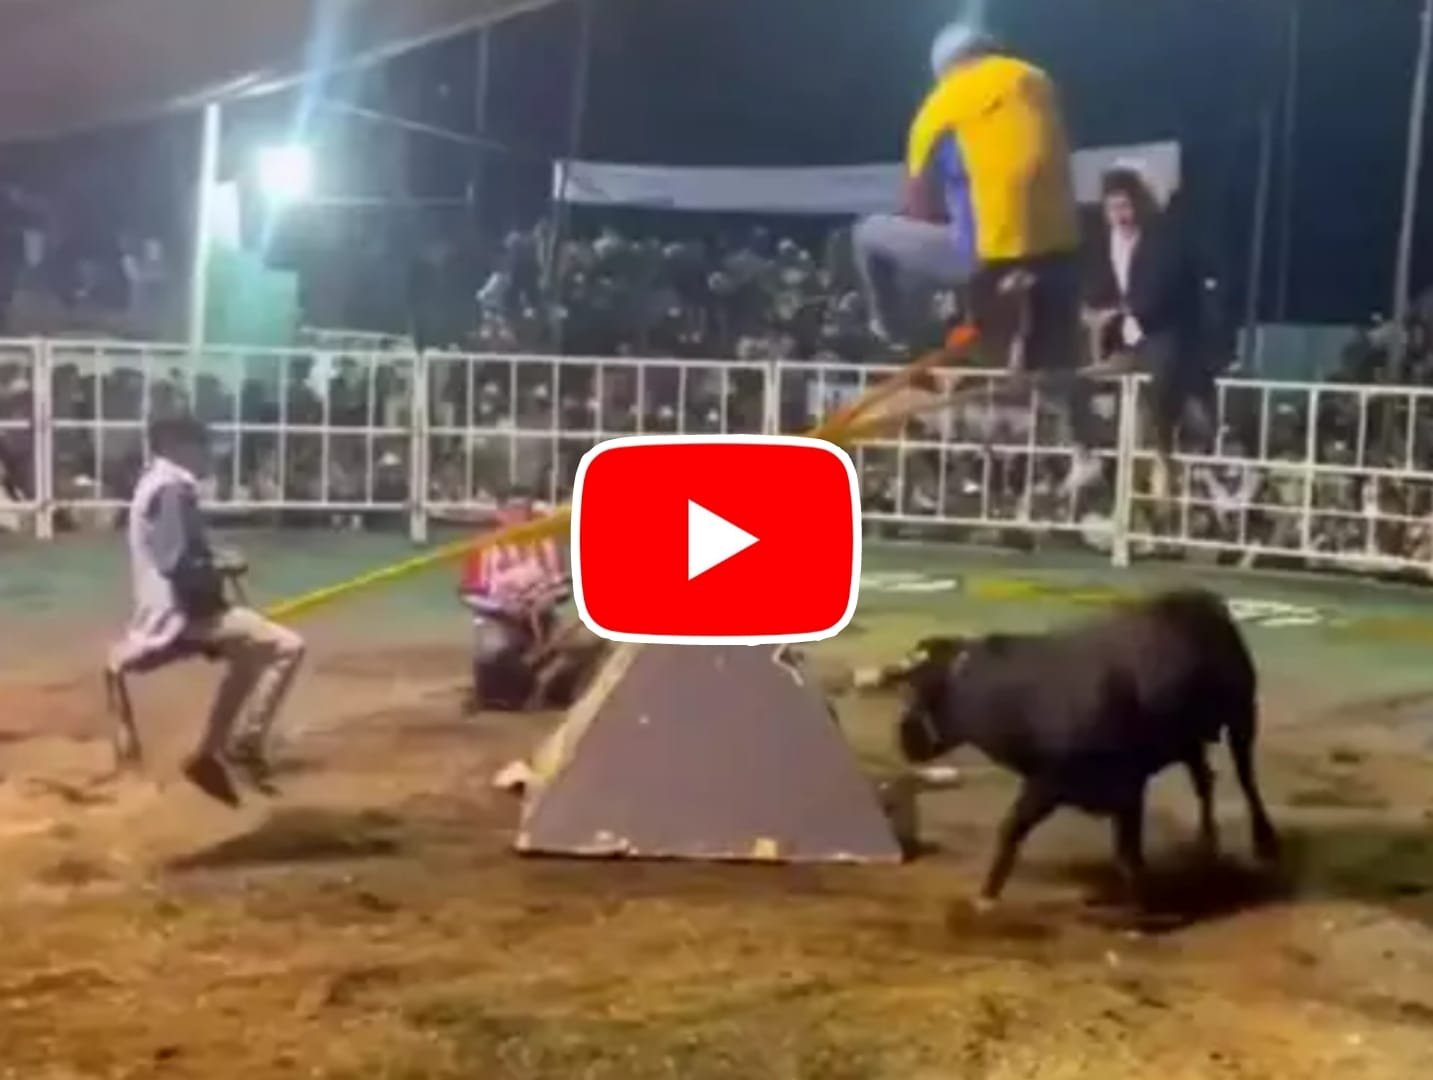 Funny Viral Video: This fun game with the bull proved difficult for the boys